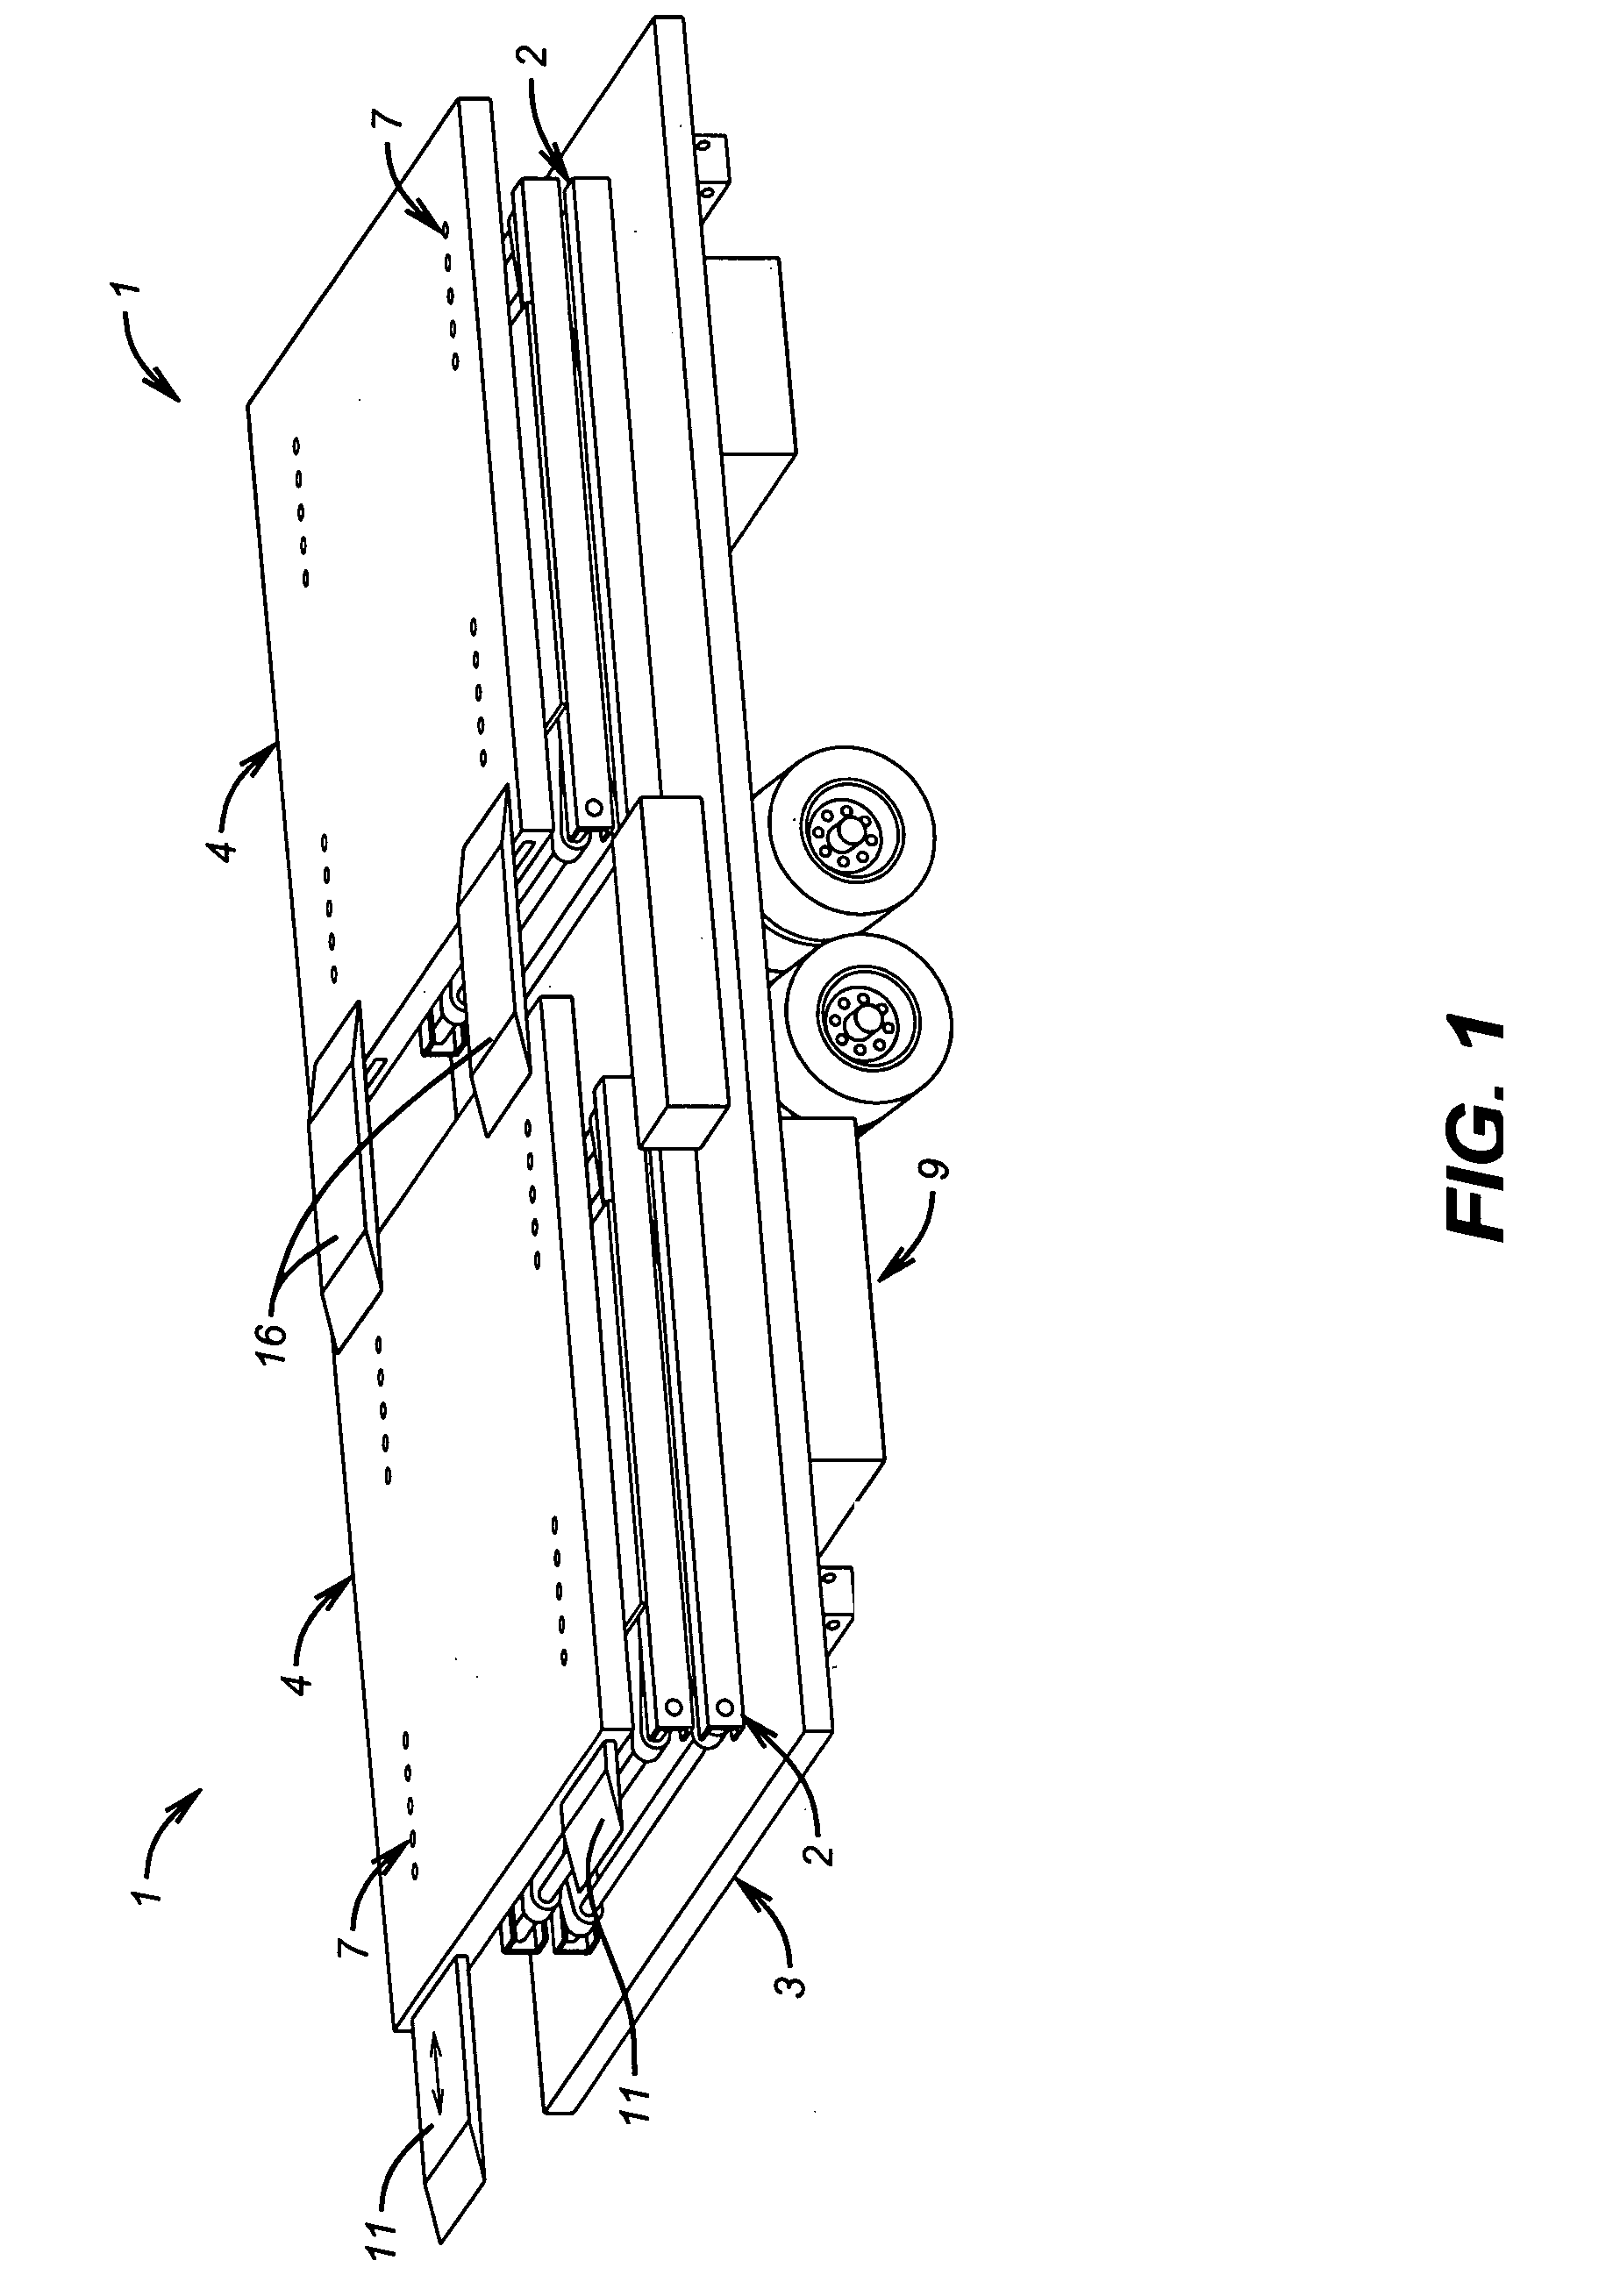 System for displaying a motor vehicle, apparatus and related methods